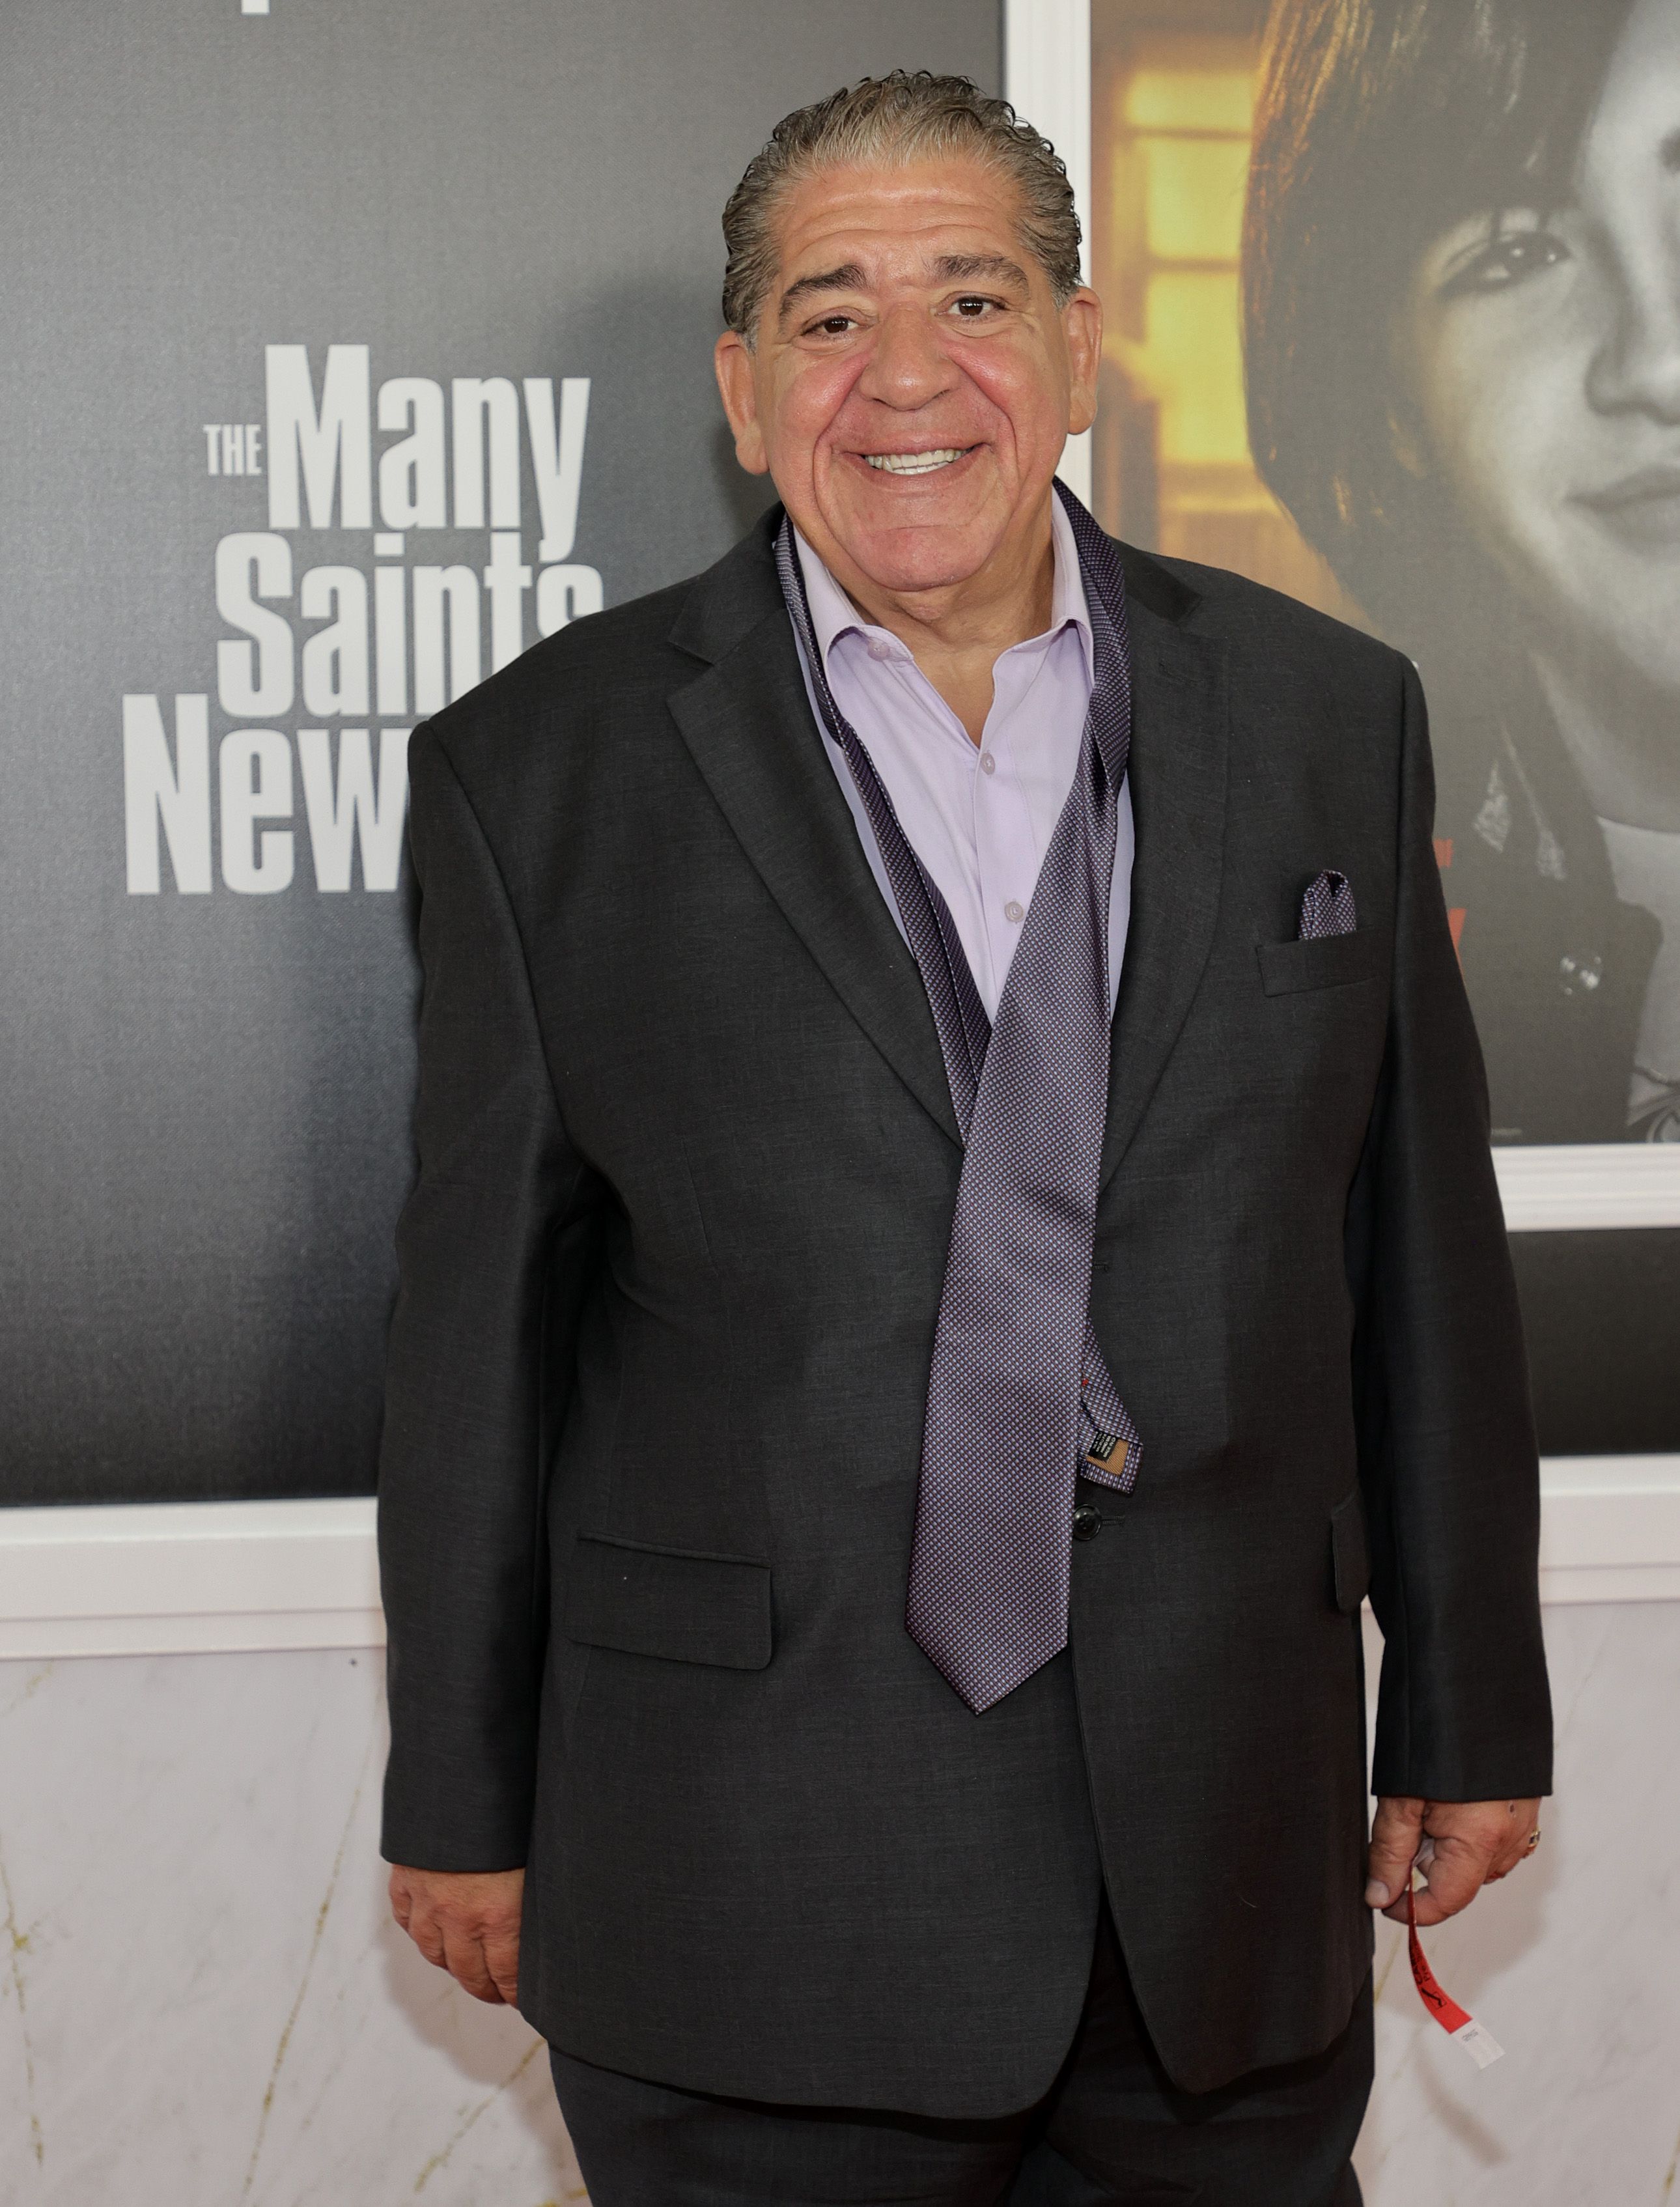 Joey Coco Diaz during the "The Many Saints Of Newark" Tribeca Fall Preview at Beacon Theatre on September 22, 2021, in New York City. | Source: Getty Images